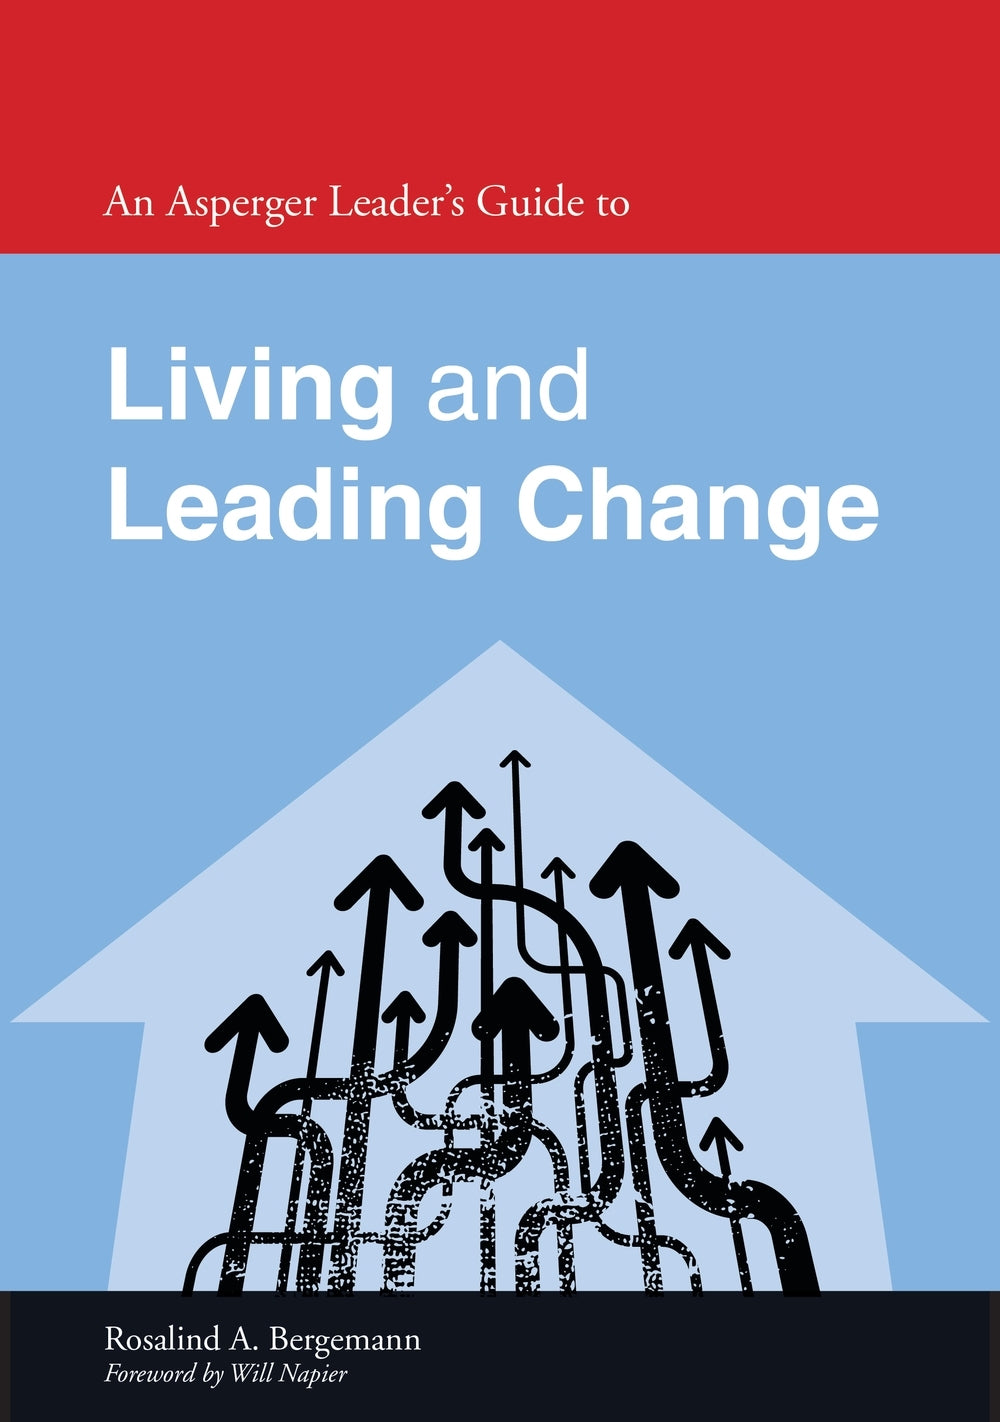 An Asperger Leader's Guide to Living and Leading Change by Rosalind Bergemann, Will Napier